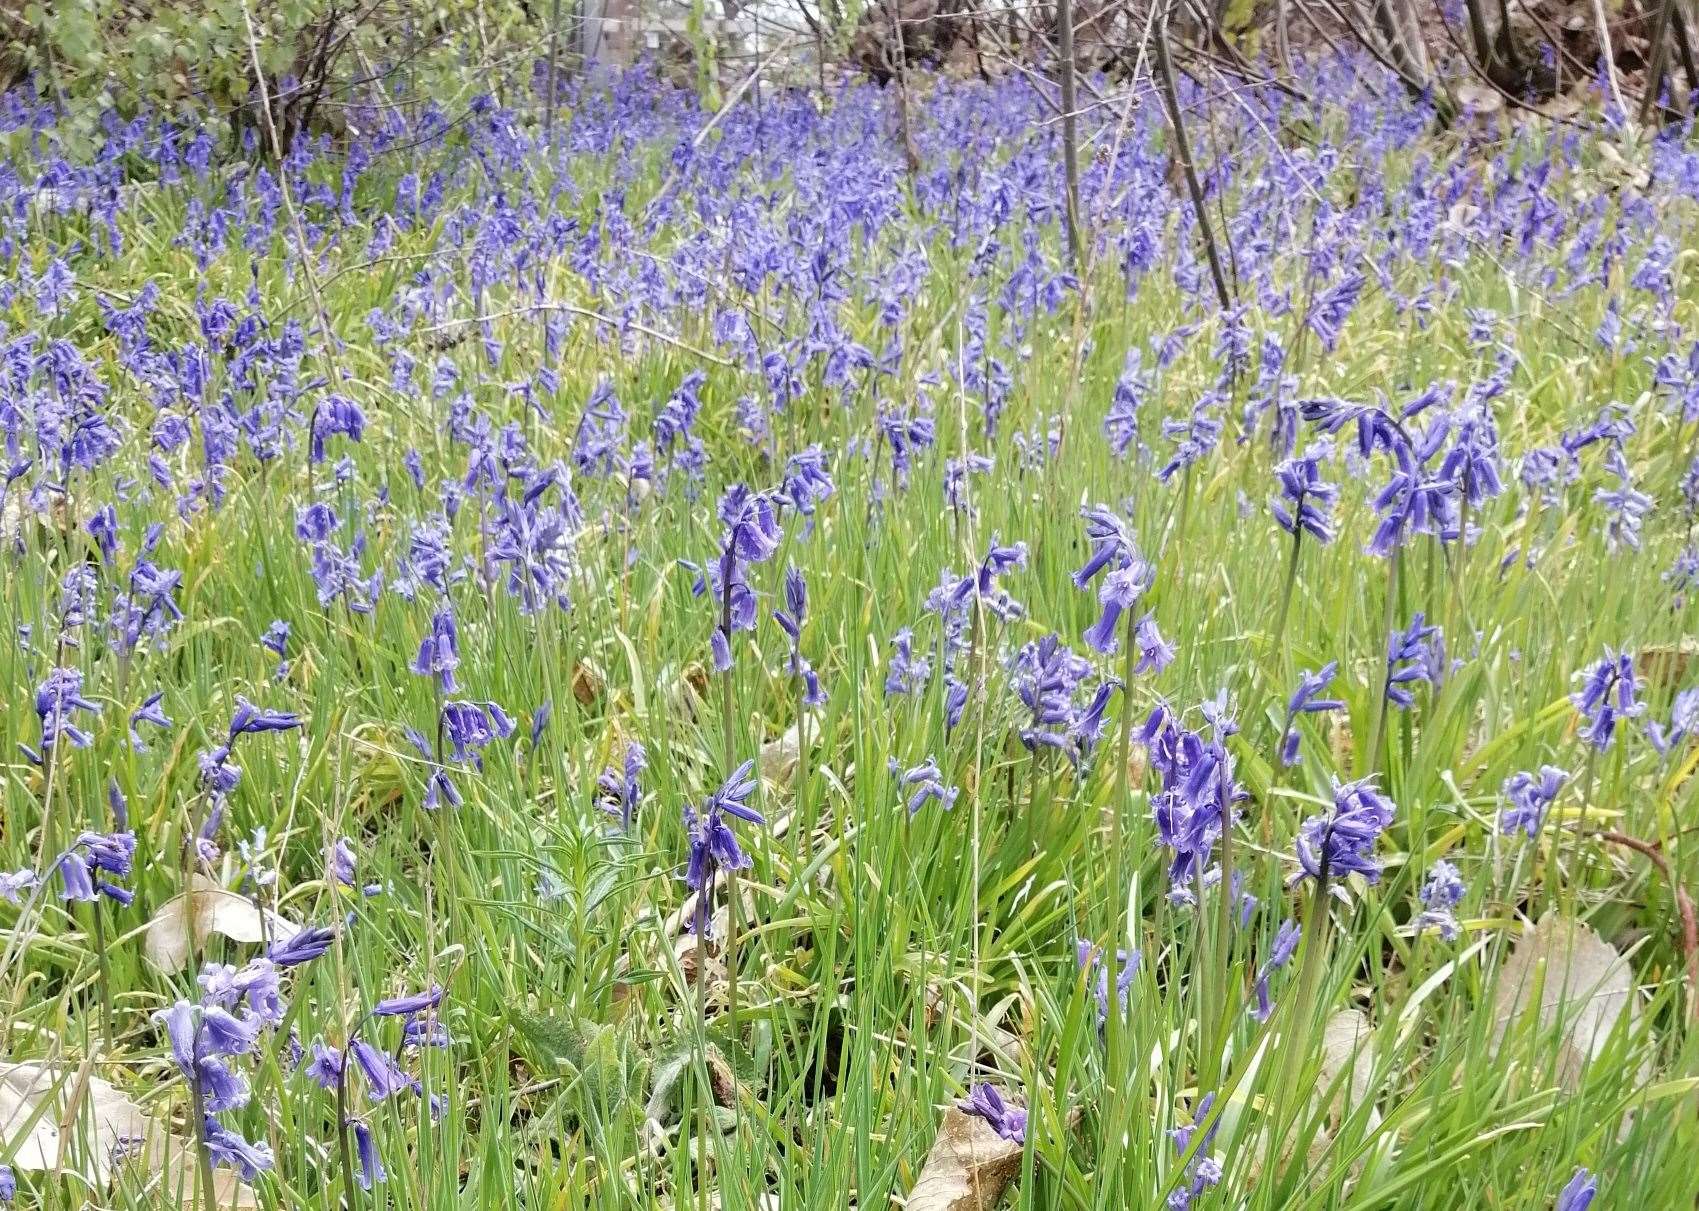 Some bluebells at the area before flowers were strimmed down